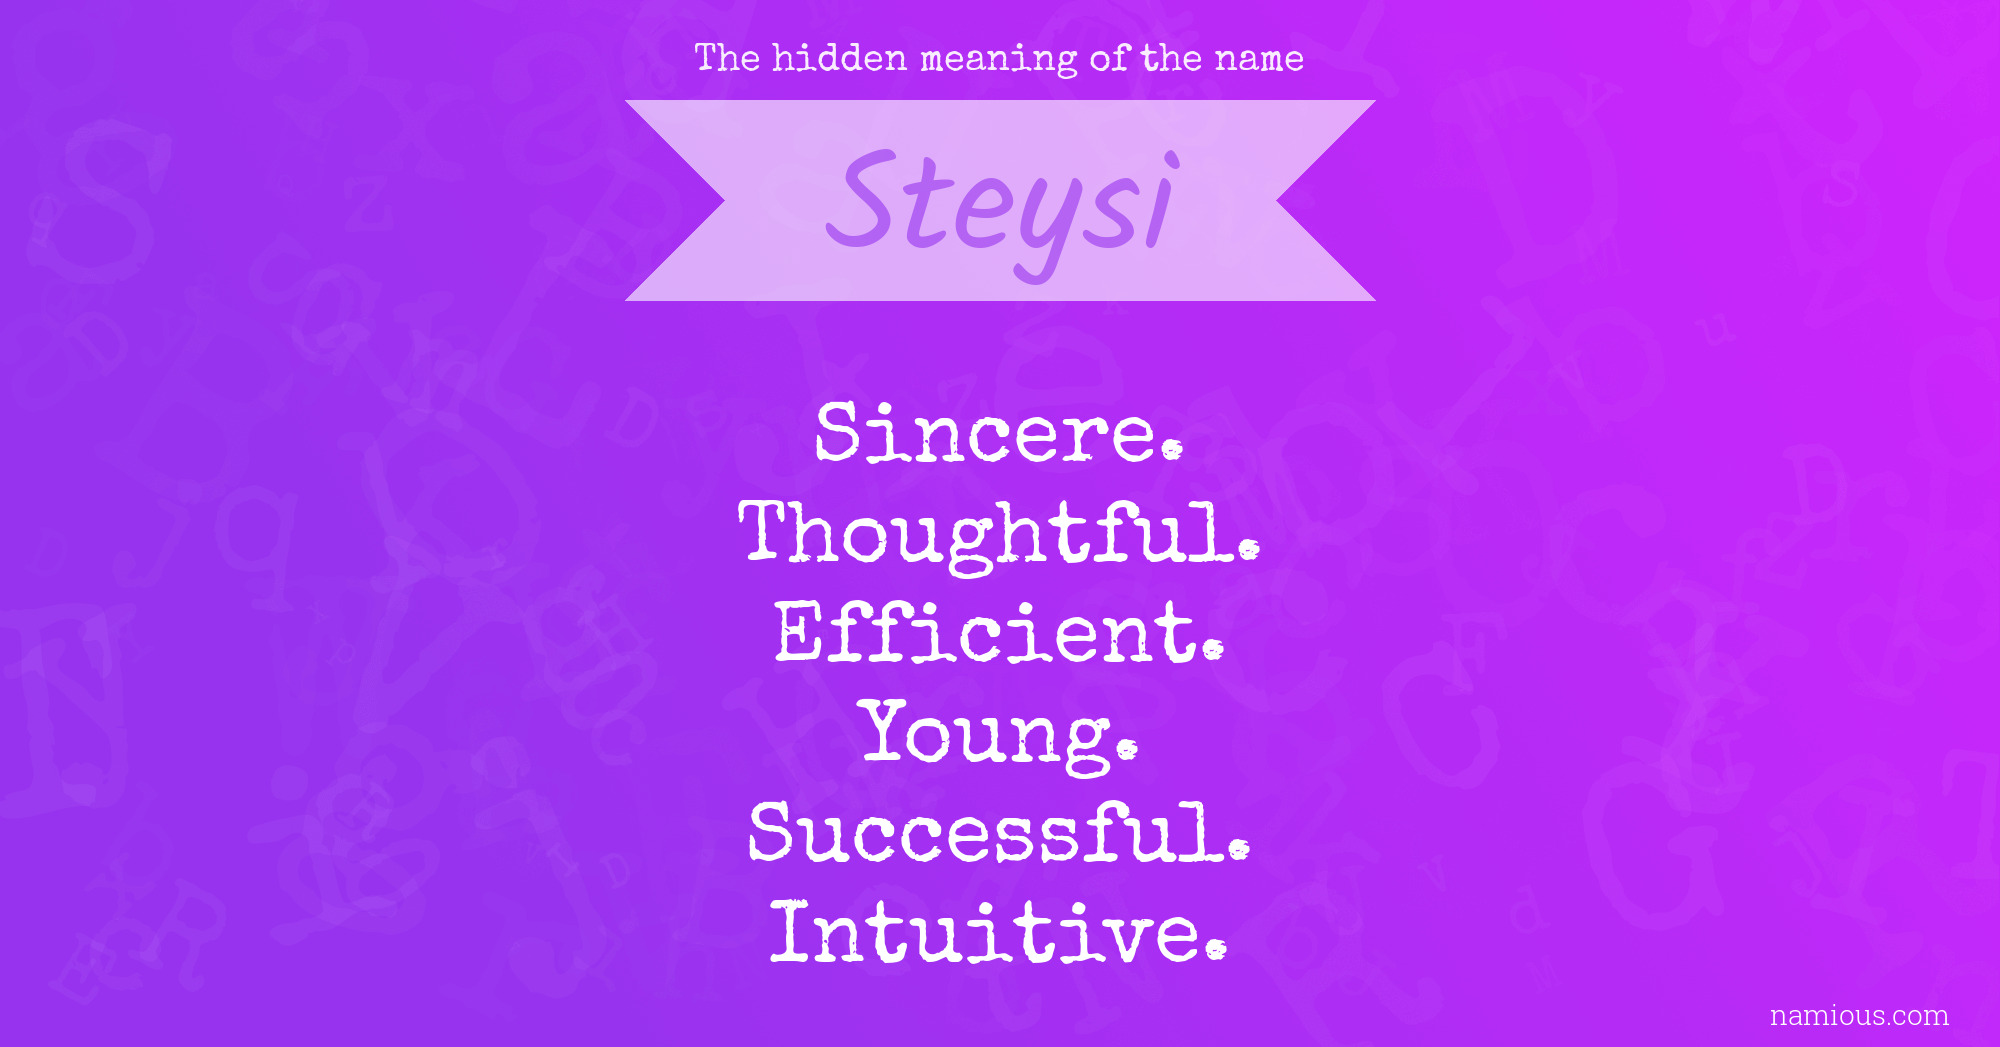 The hidden meaning of the name Steysi